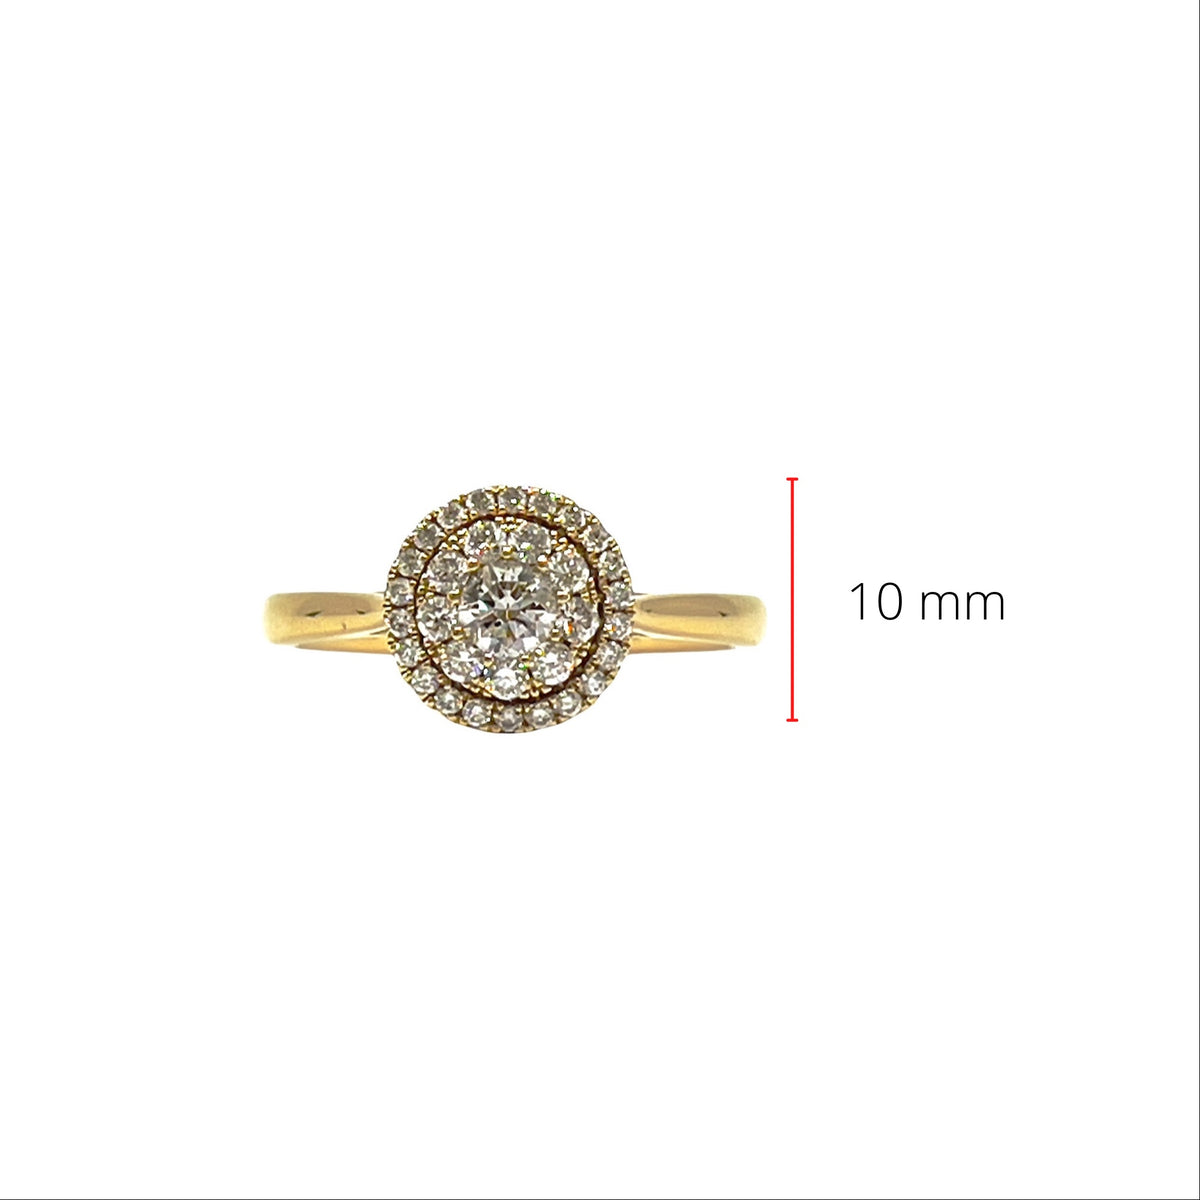 14K Yellow Gold 0.46cttw Diamond Halo Engagement Ring, size 6.5